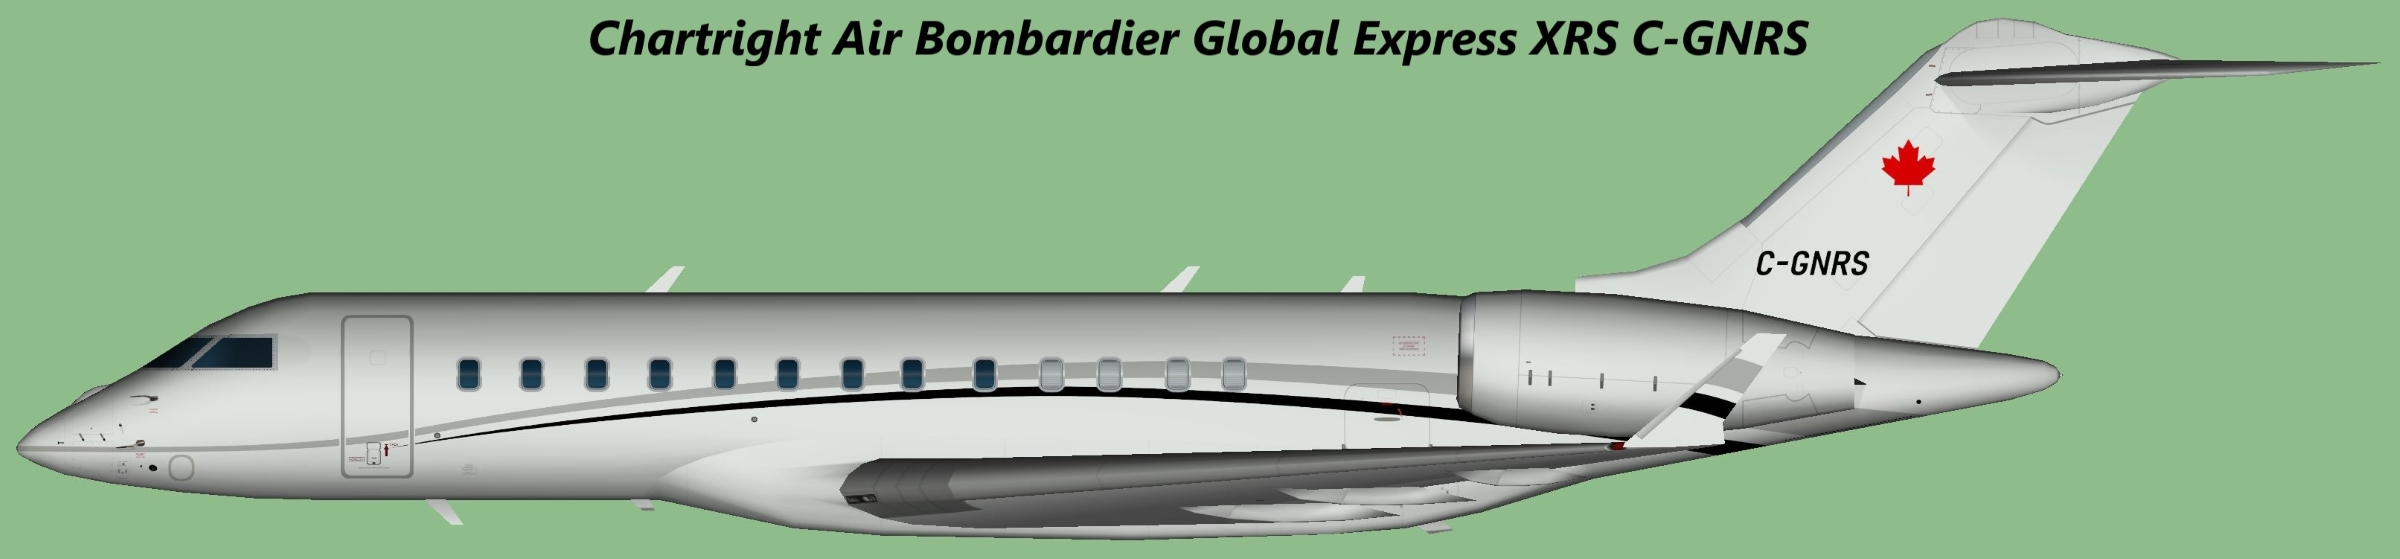 Chartright Air Bombardier Global Express XRS C-GNRS